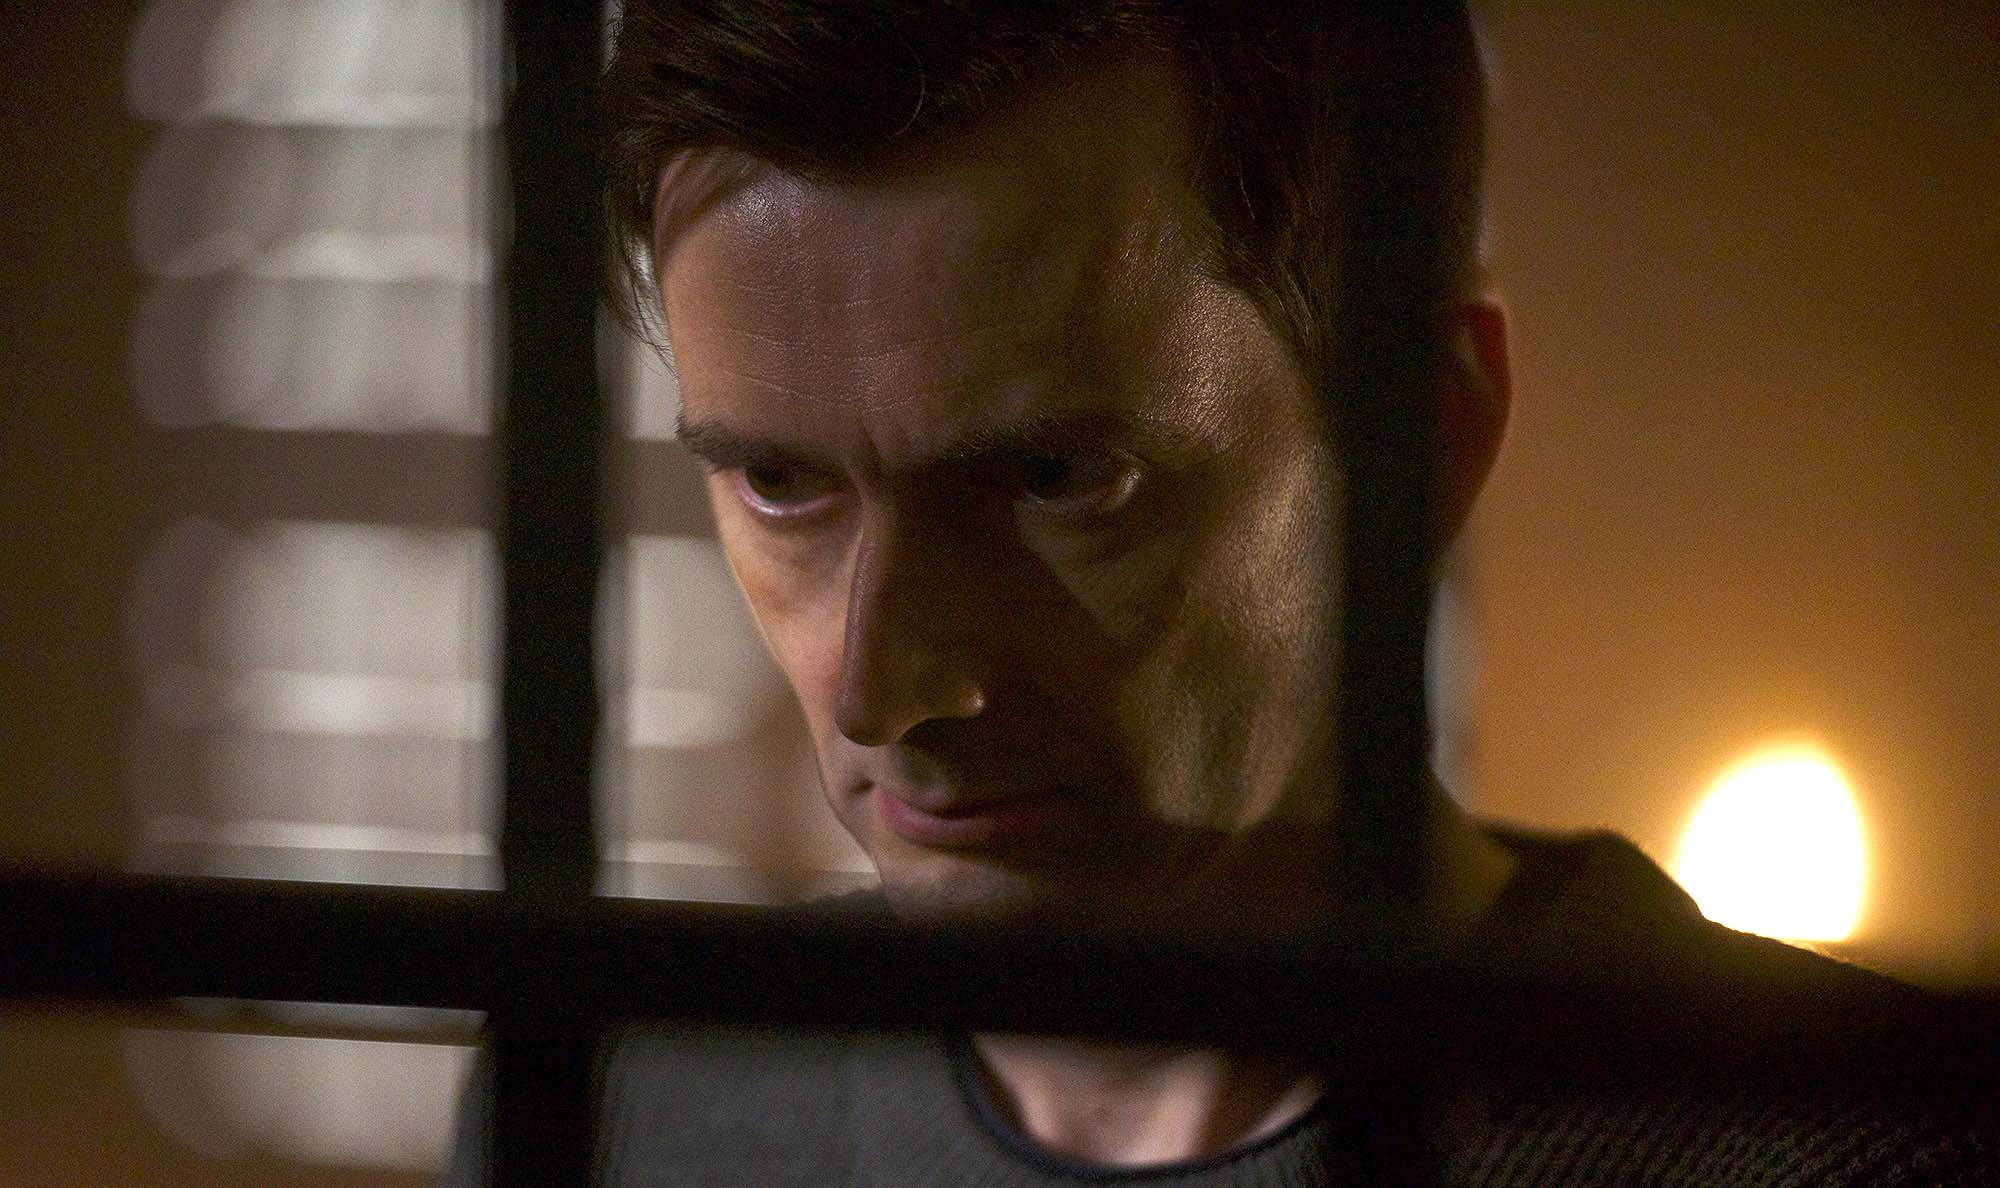 Do you miss seeing David Tennant on the TV screen? Check out these fantastic David Tennant roles from 'Fright Night' to 'Bad Samaritan'.